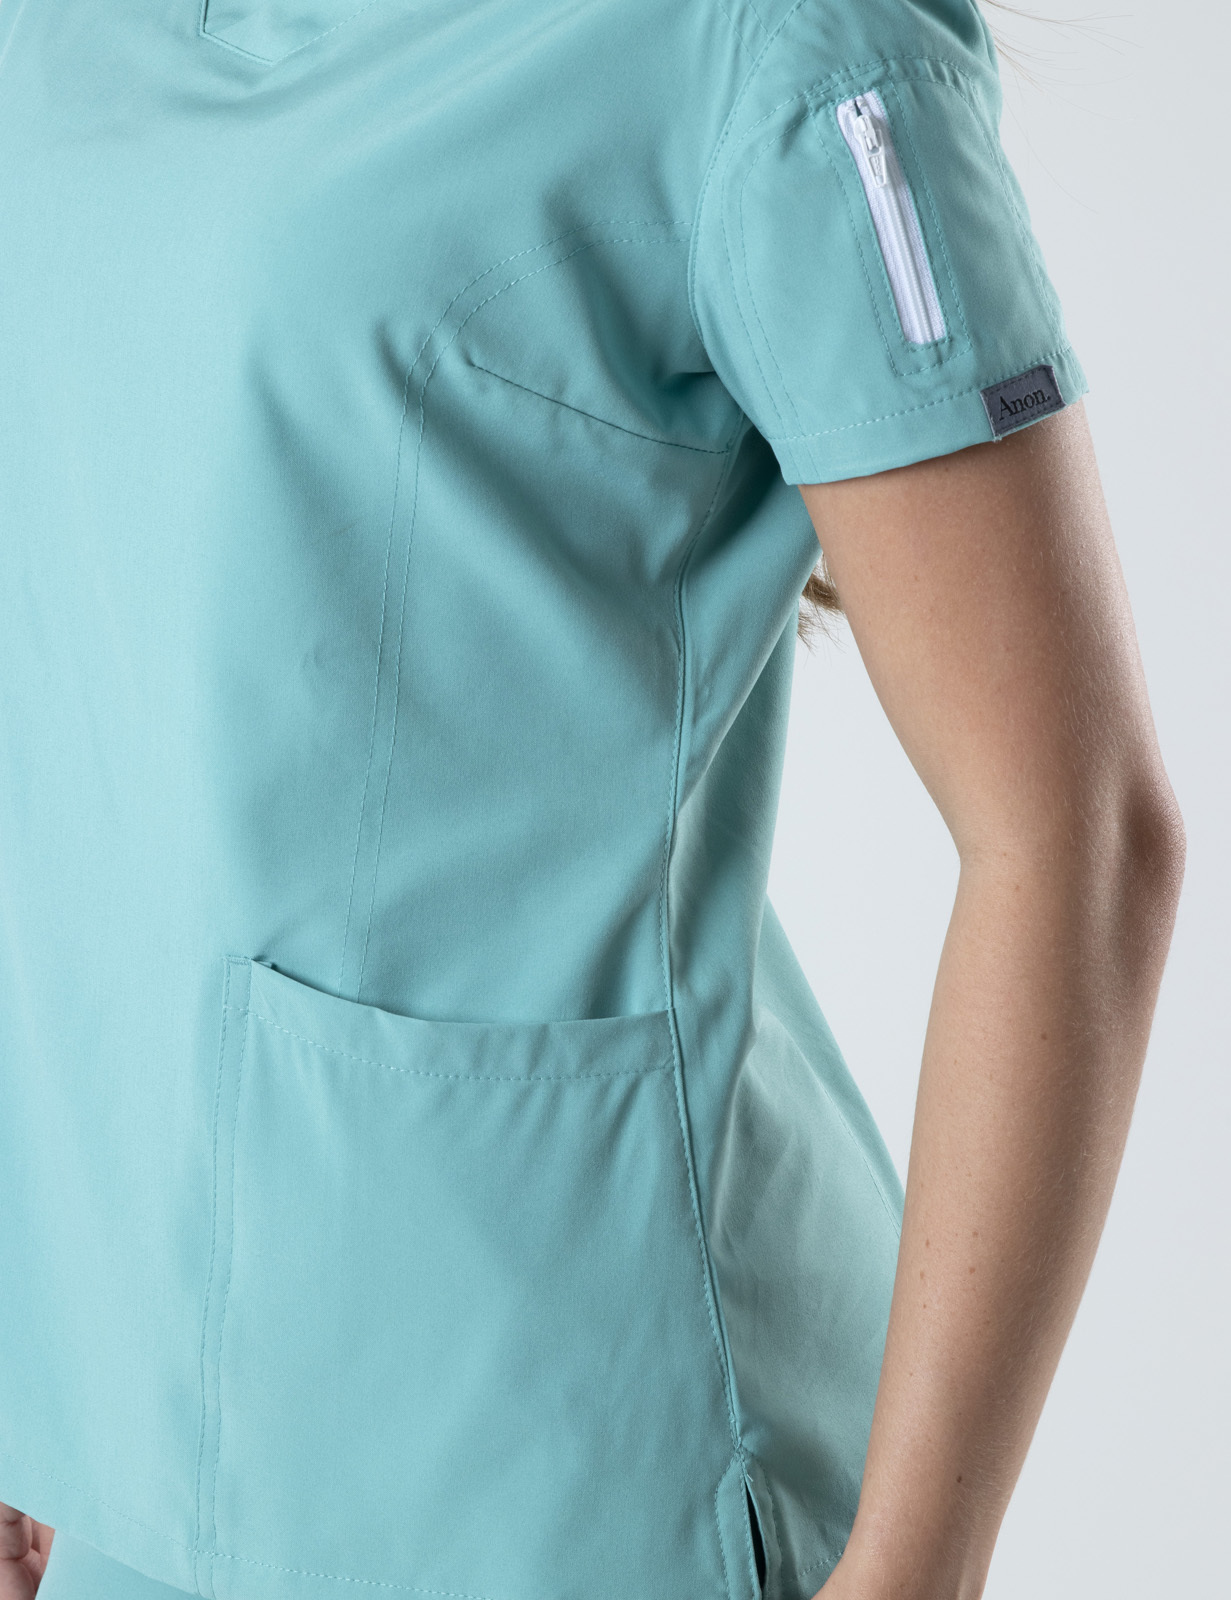 Anon Women's Scrub Top (Whisper Collection) Poly/Spandex - Cool Mint